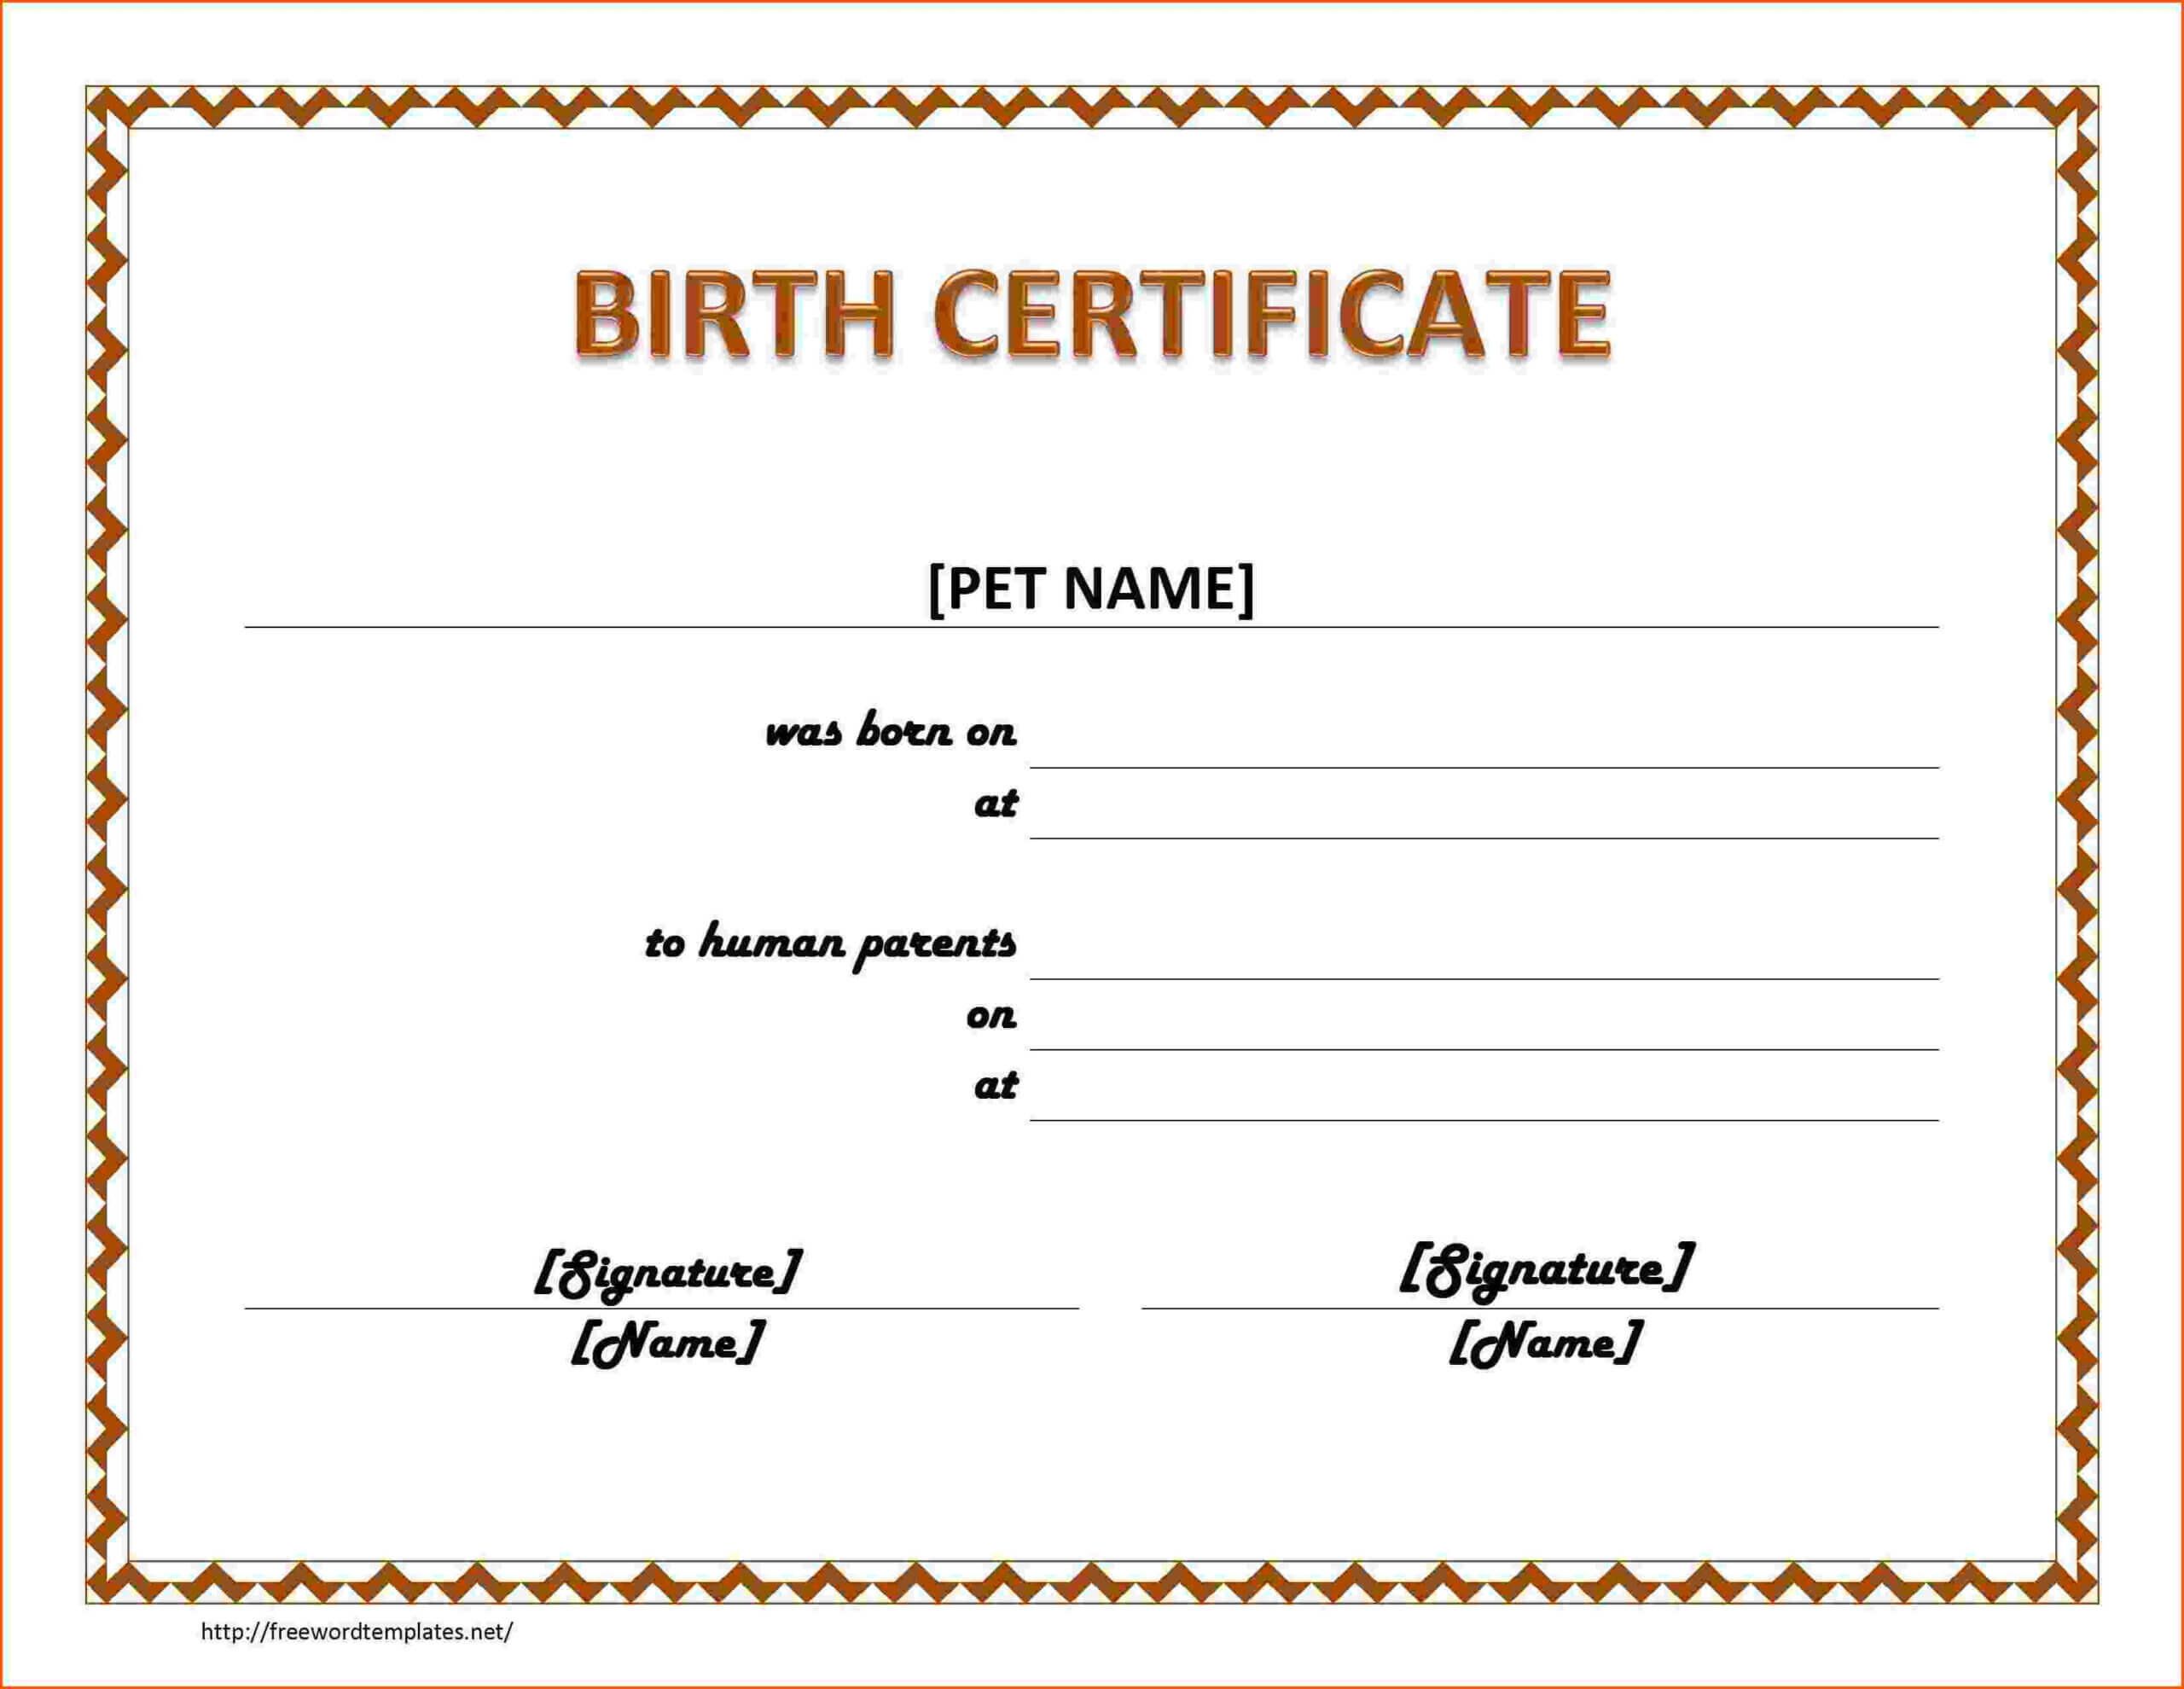 6+ Birth Certificate Template For Microsoft Word | Survey With Regard To Birth Certificate Template For Microsoft Word